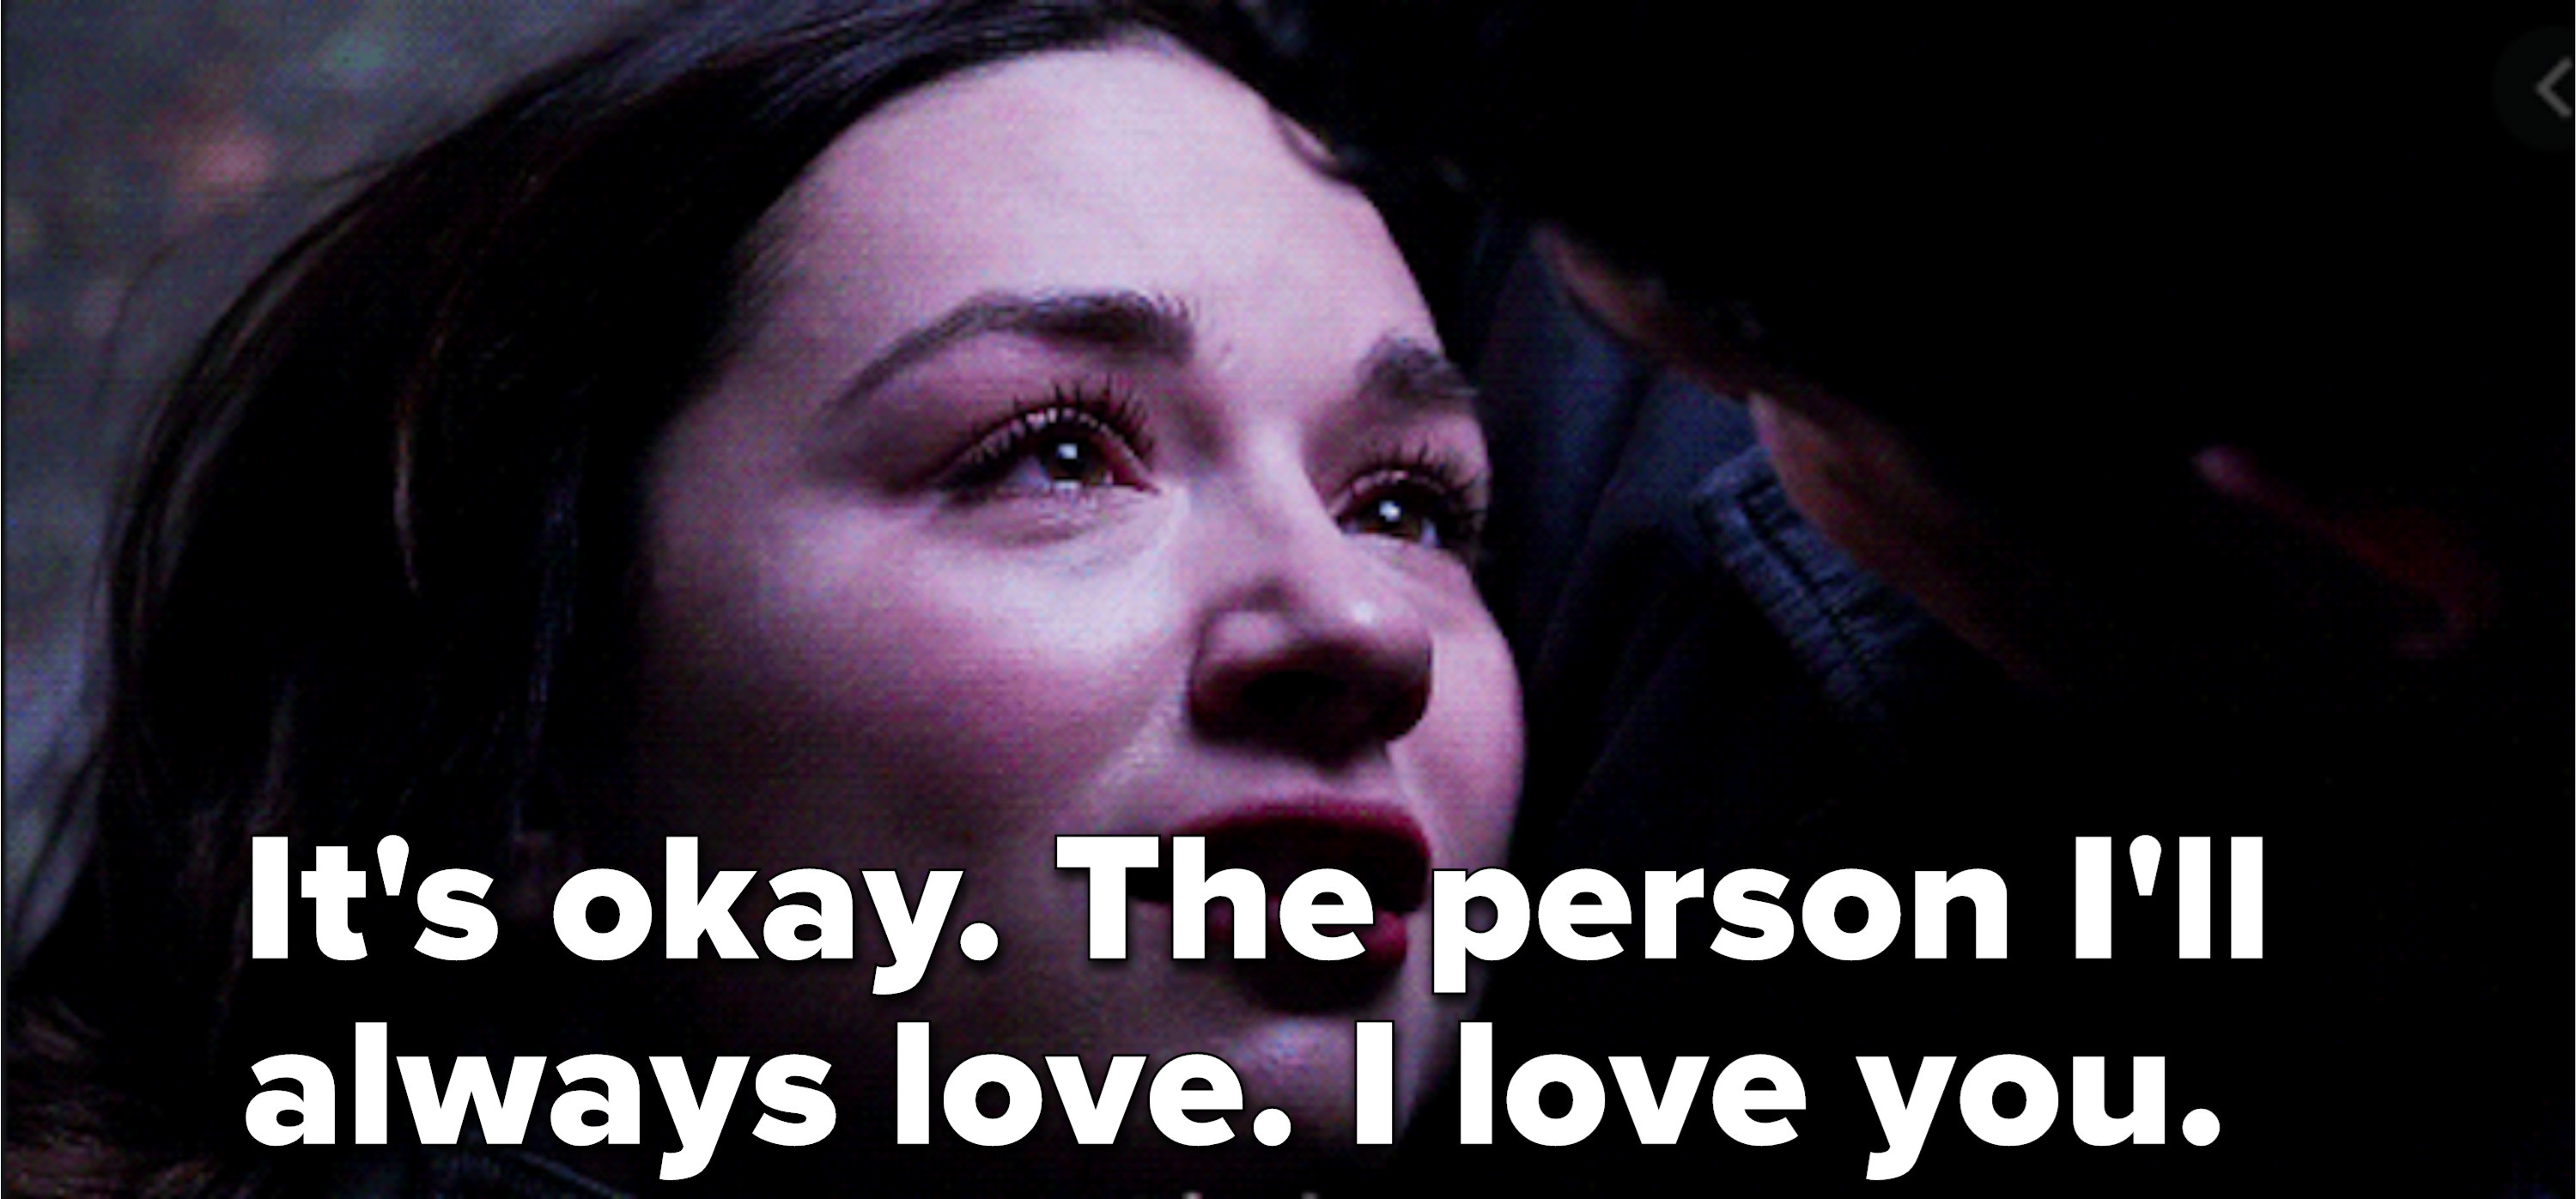 Allison to Scott as she dies in his arms: &quot;It&#x27;s okay. The person I&#x27;ll always love. I love you.&quot;